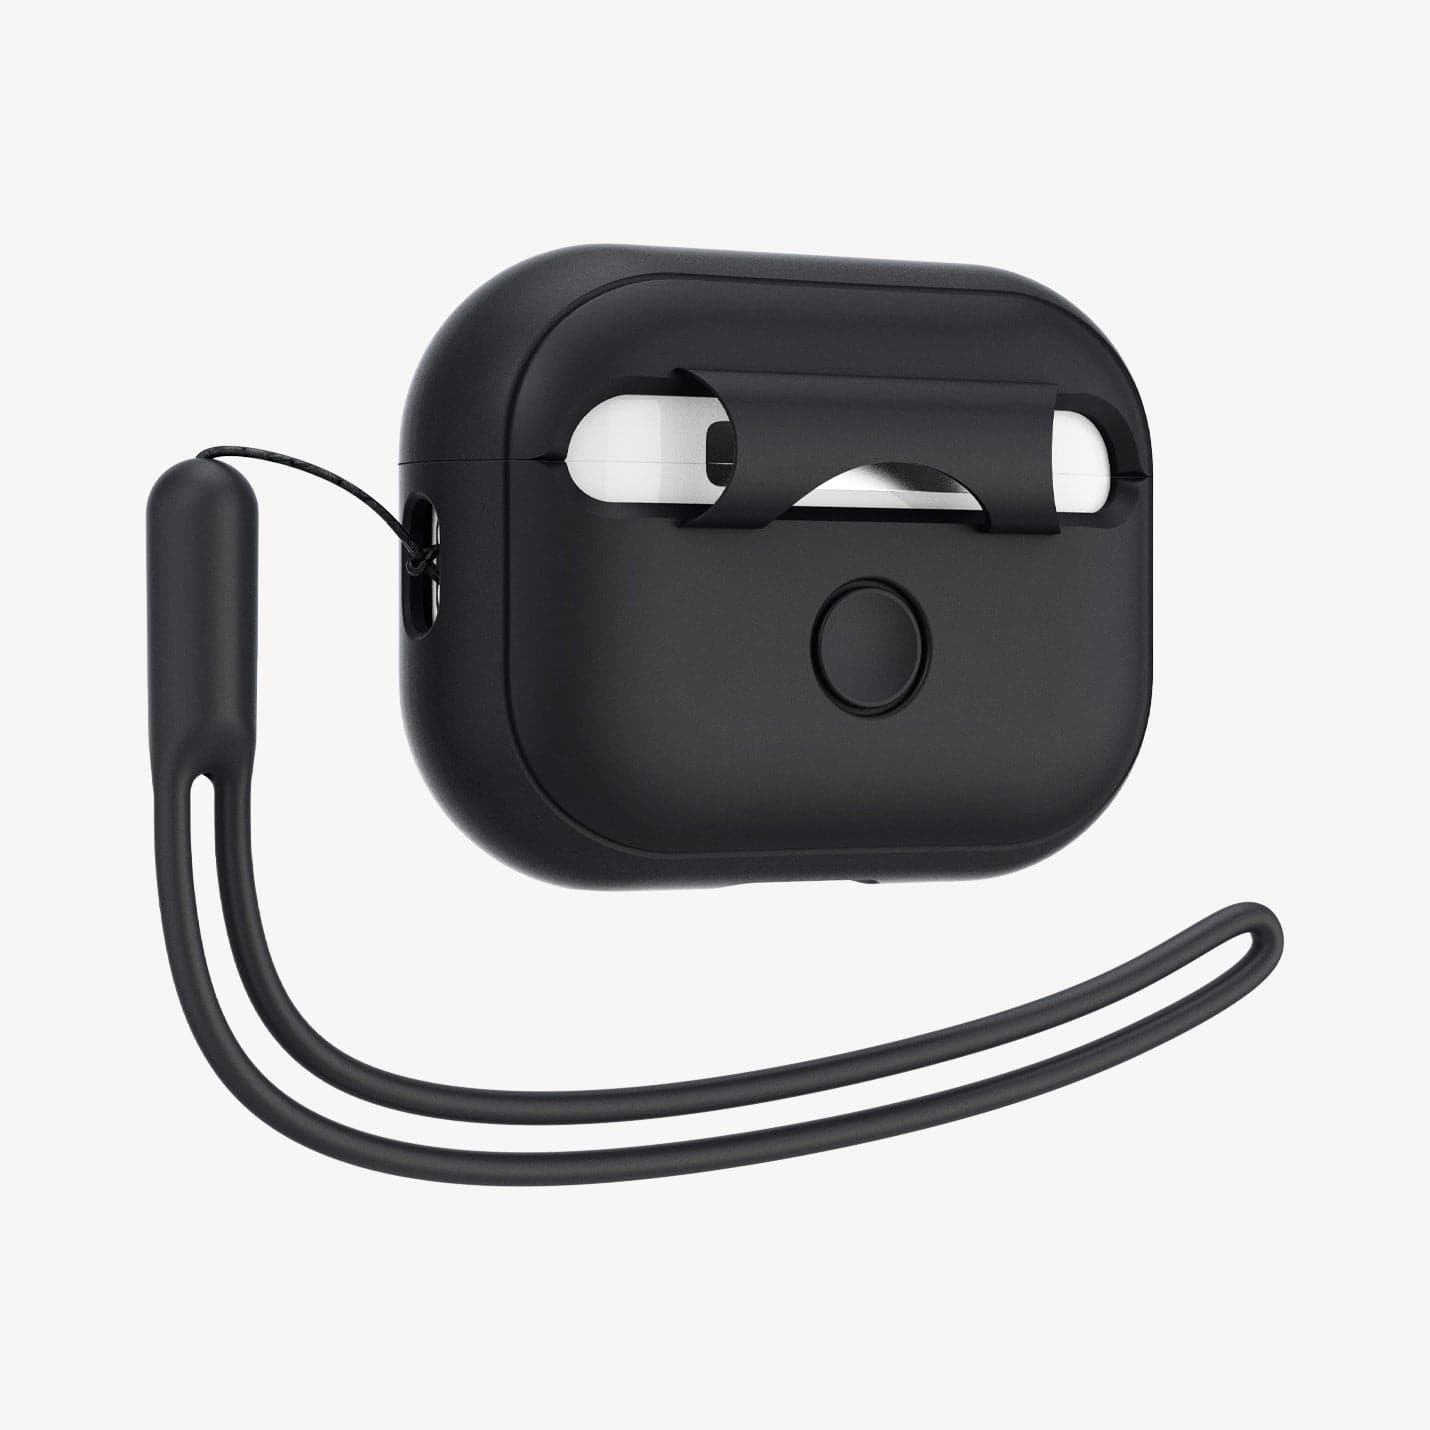 ACS05479 - Apple AirPods Pro 2 Case Silicone Fit + strap in black showing the back and strap